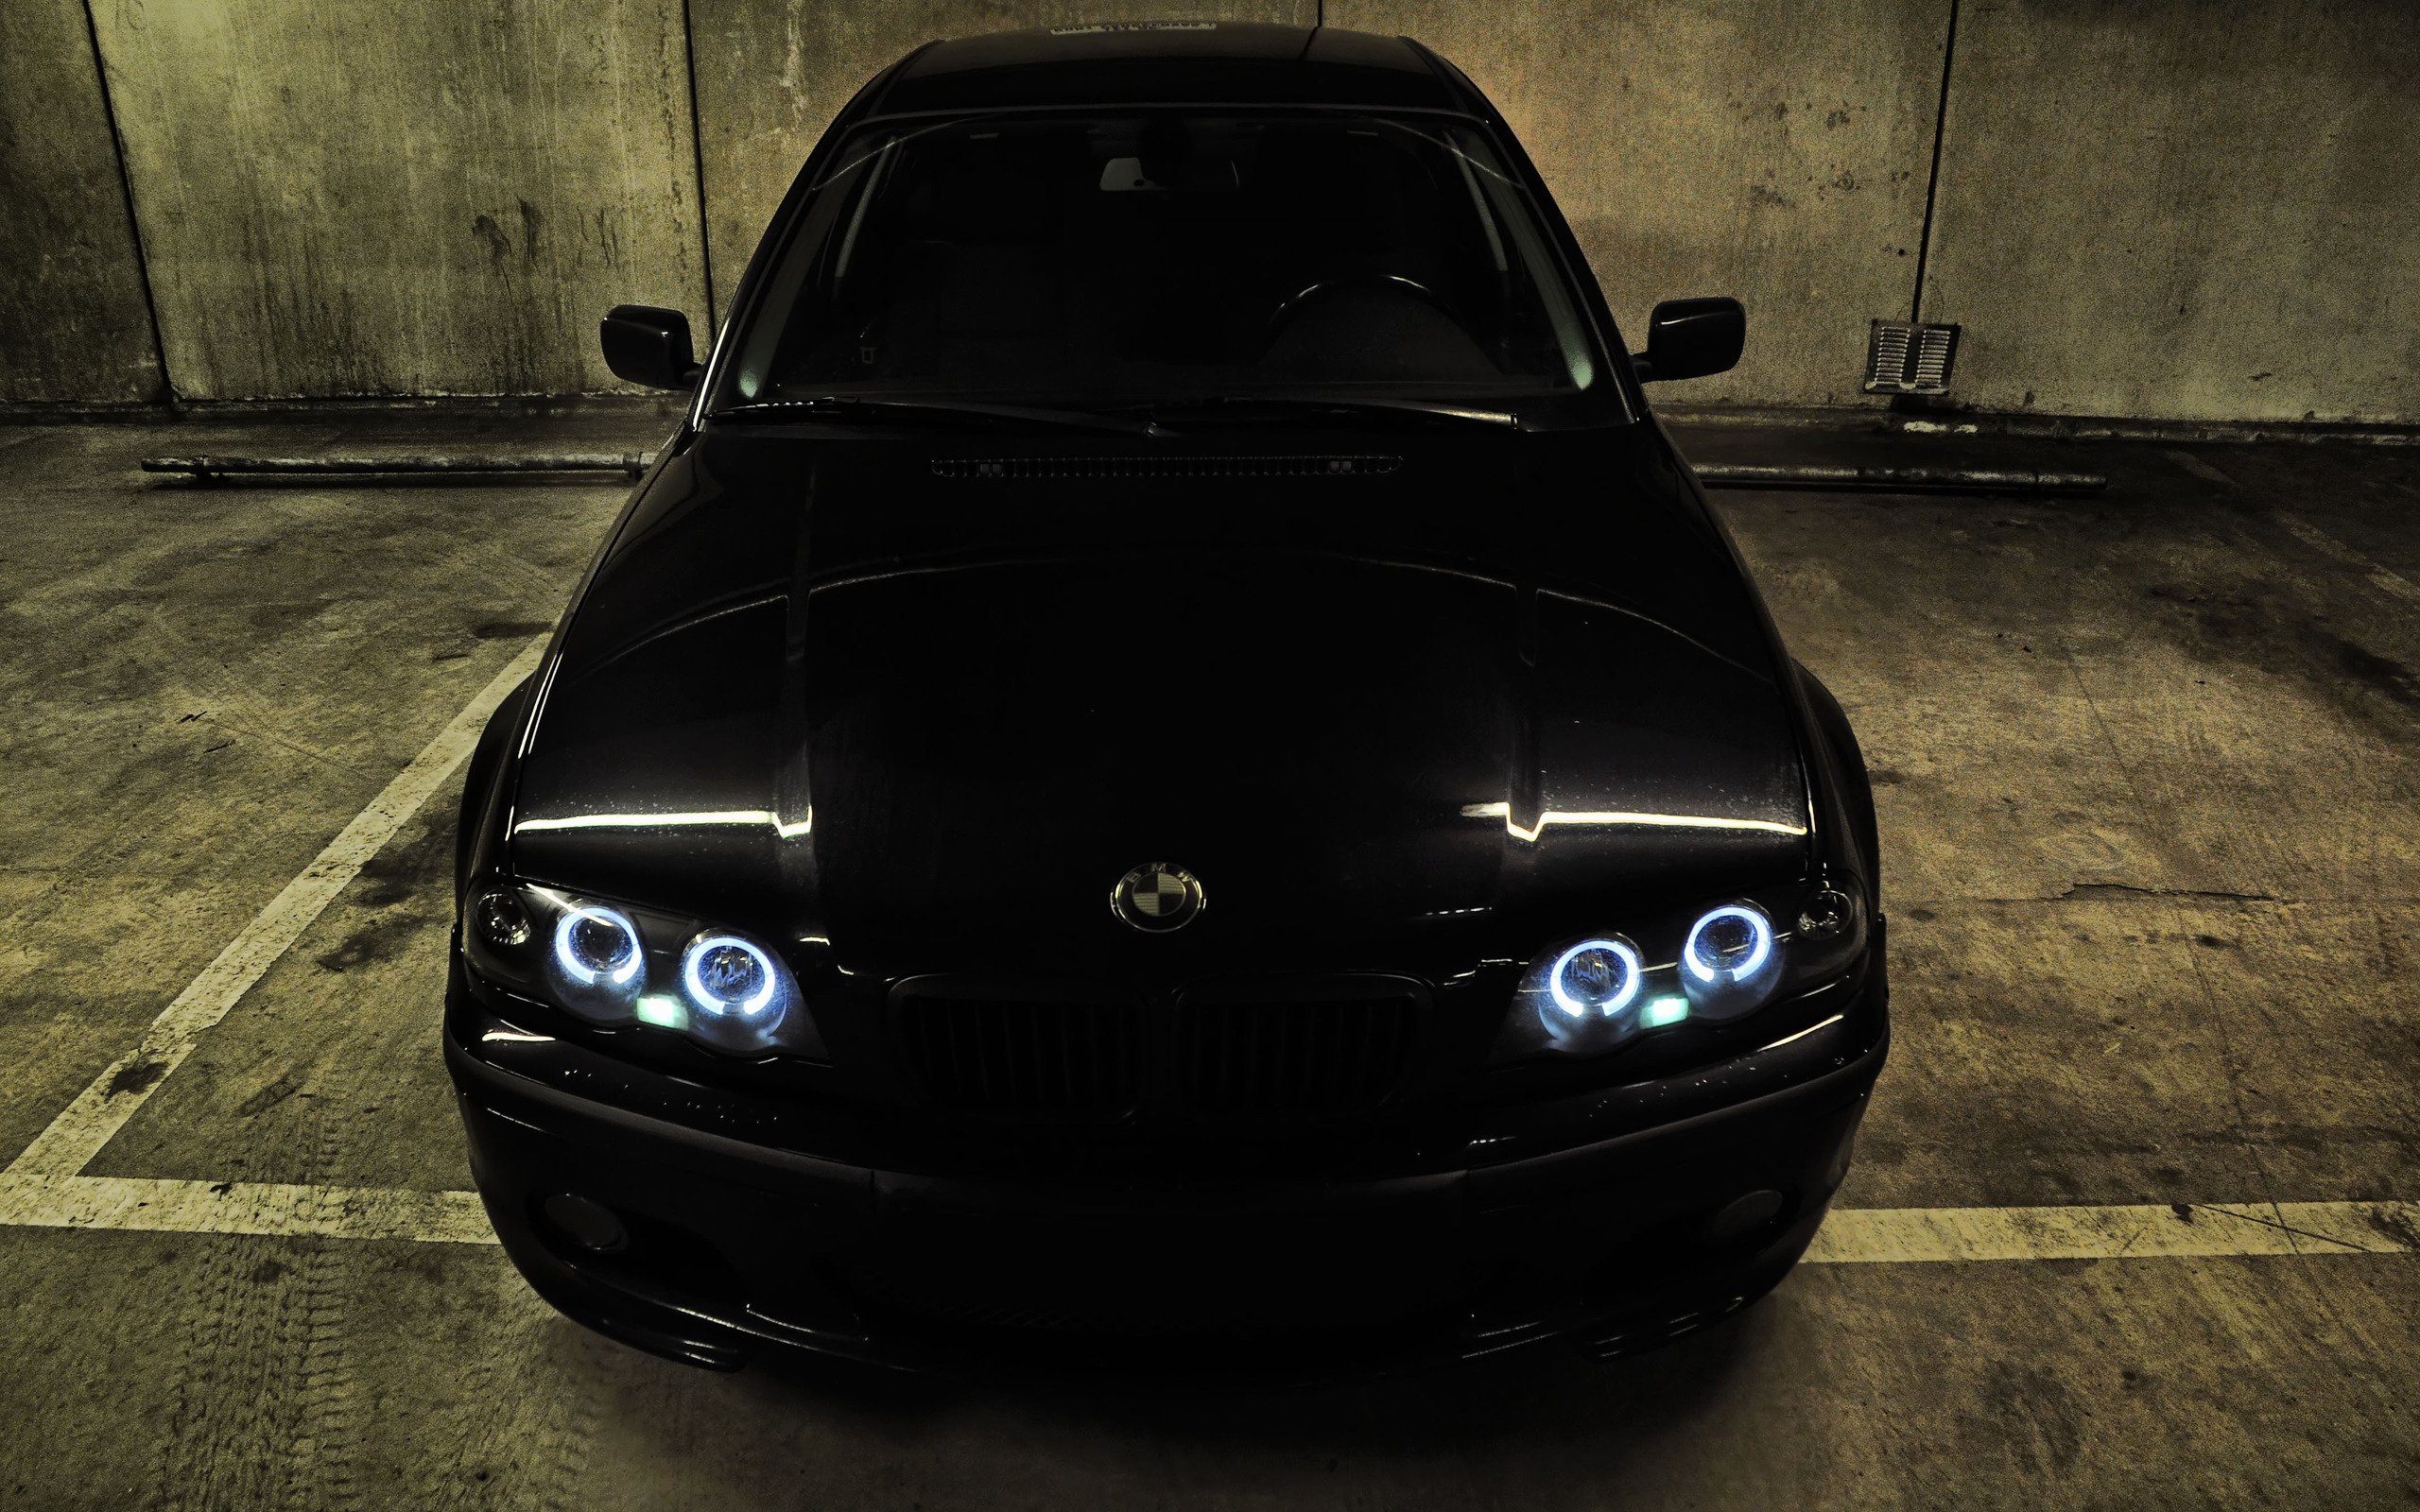 Black BMW wallpapers and images   wallpapers pictures photos